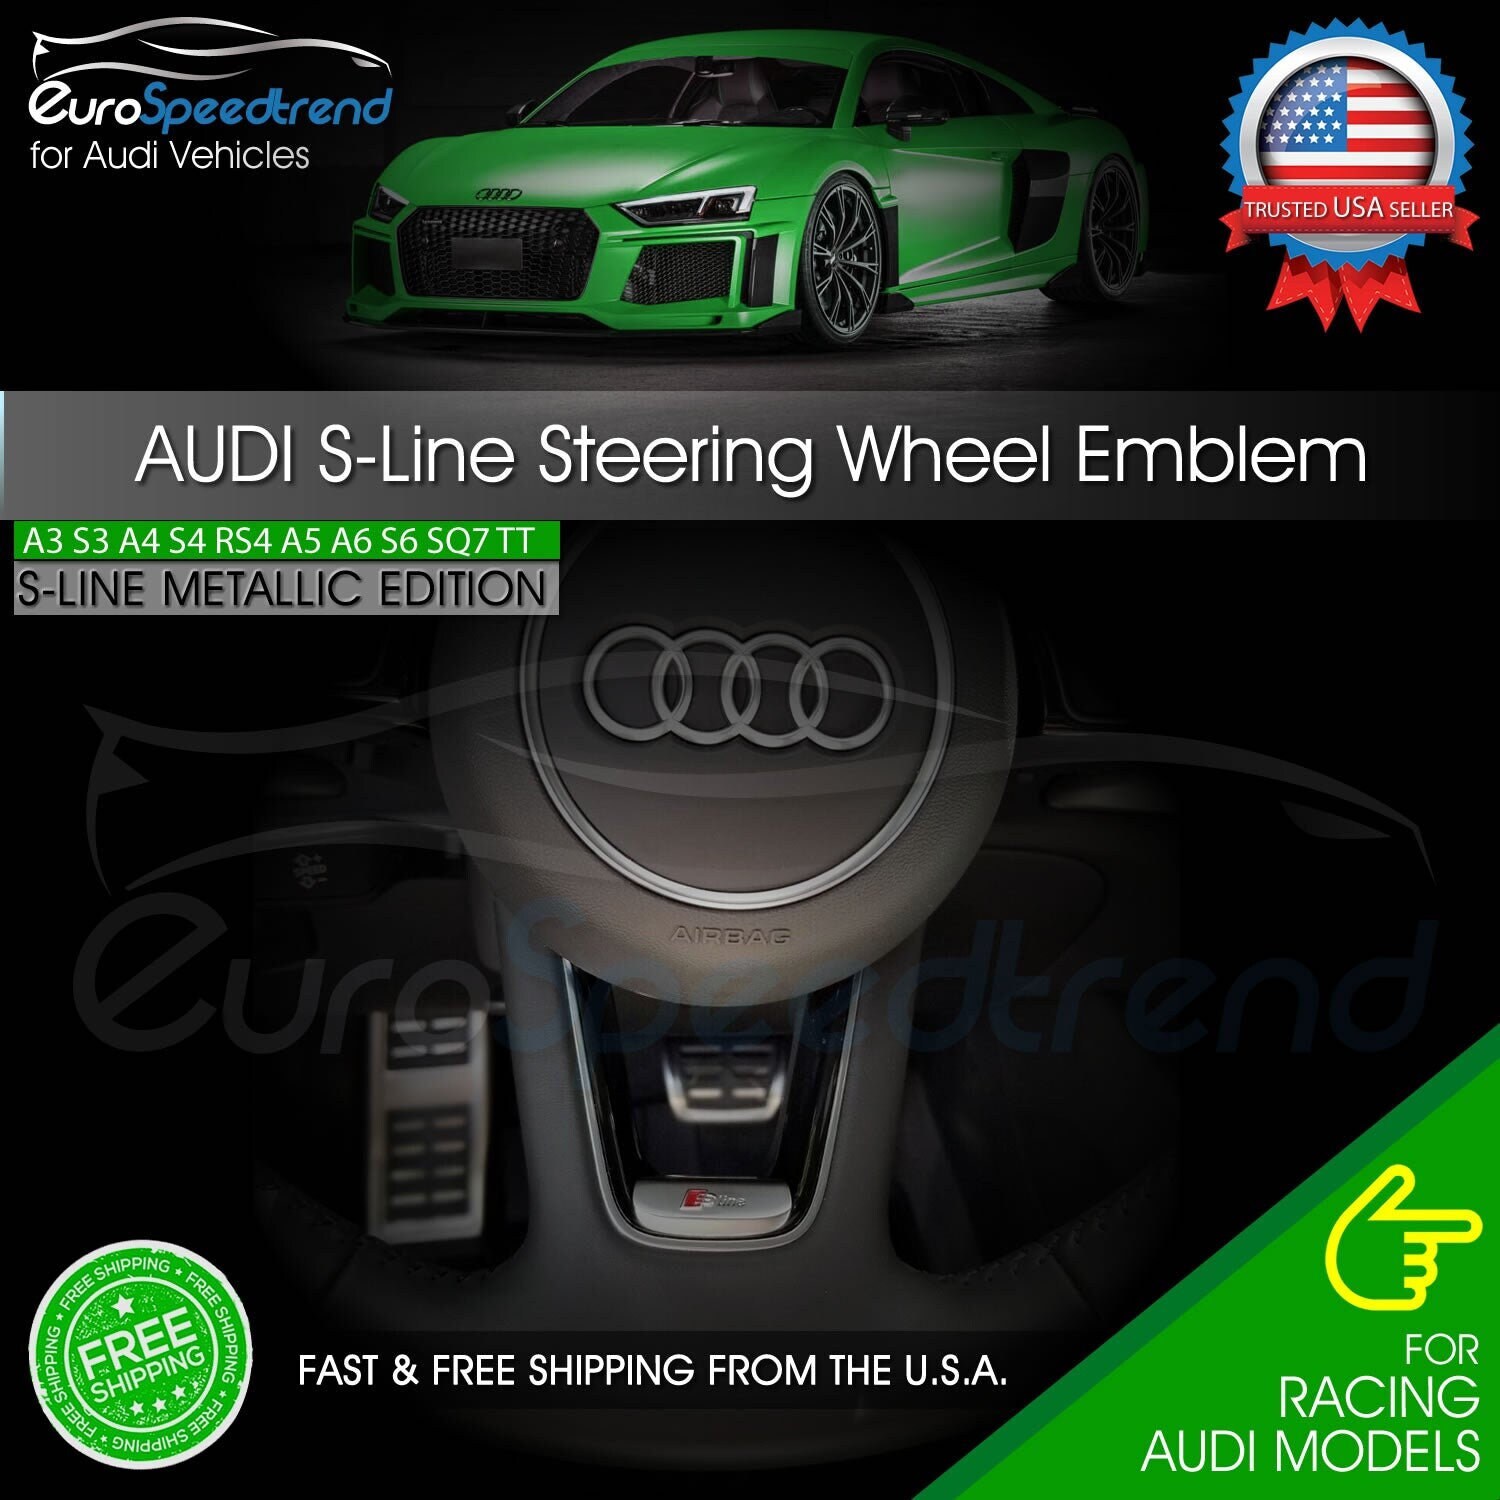 Powered by Audi Racing Sport S Line Window Decal sticker emblem logo  SILVER/ Red